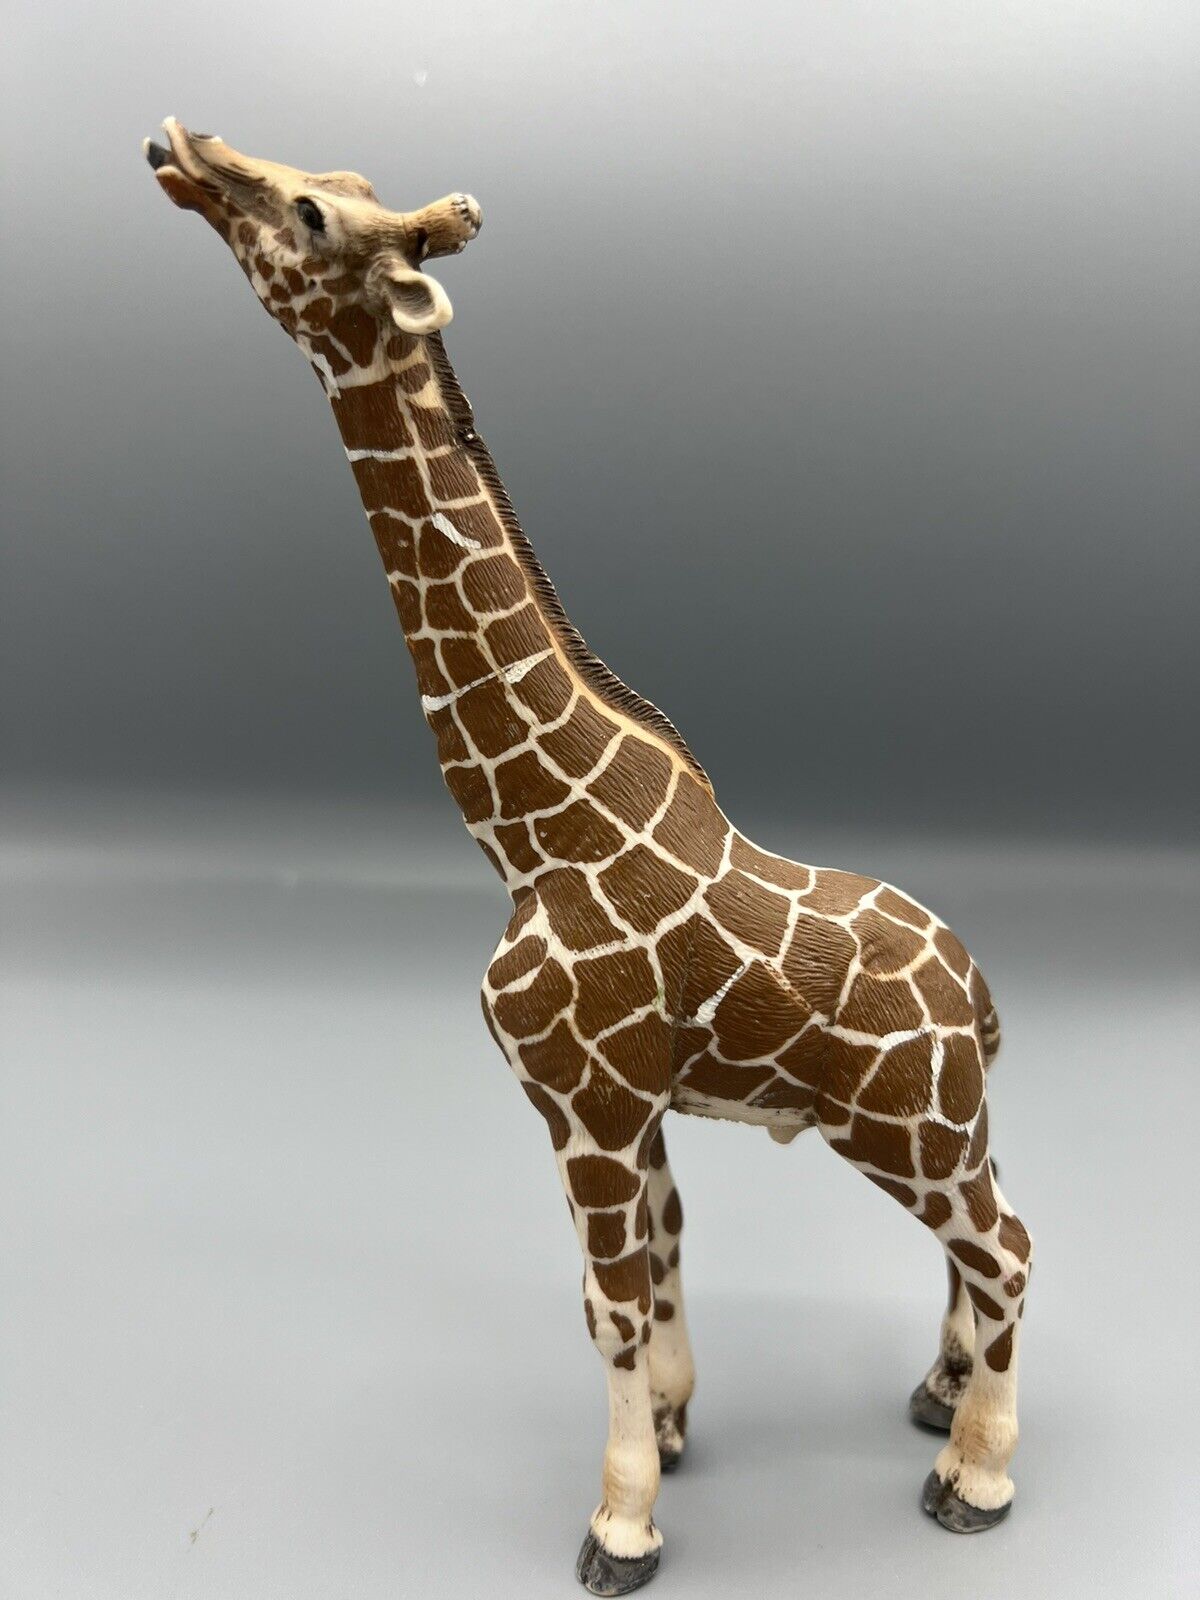 Schleich Male Giraffe Eating D-73527 Animal Figure 2008 Adult Retired Toy 7 inch